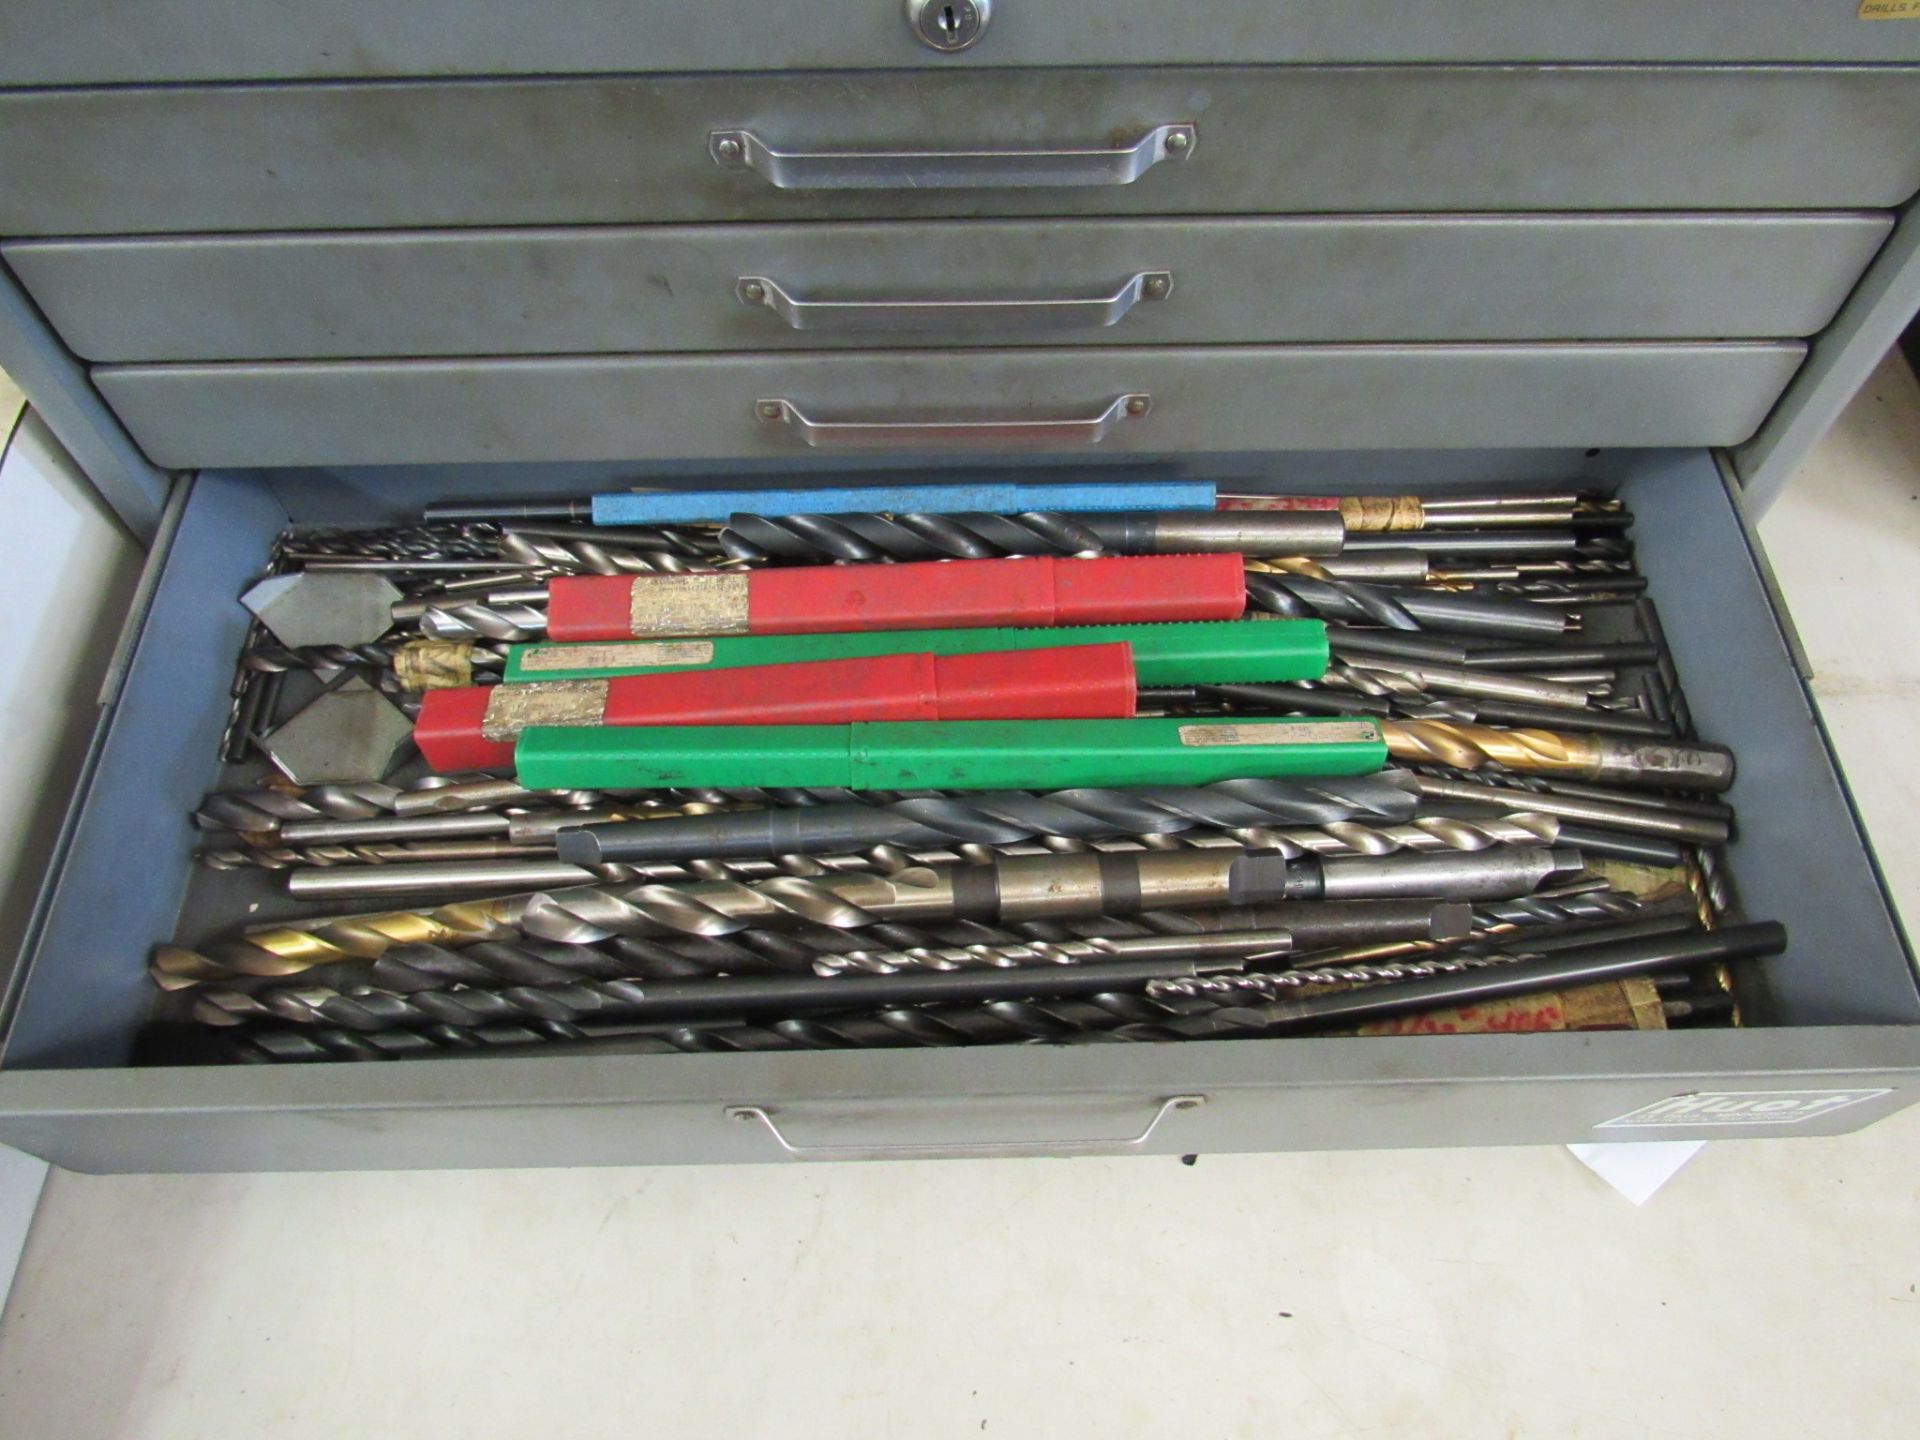 HUOT CABINET WITH DRILLS - Image 2 of 5